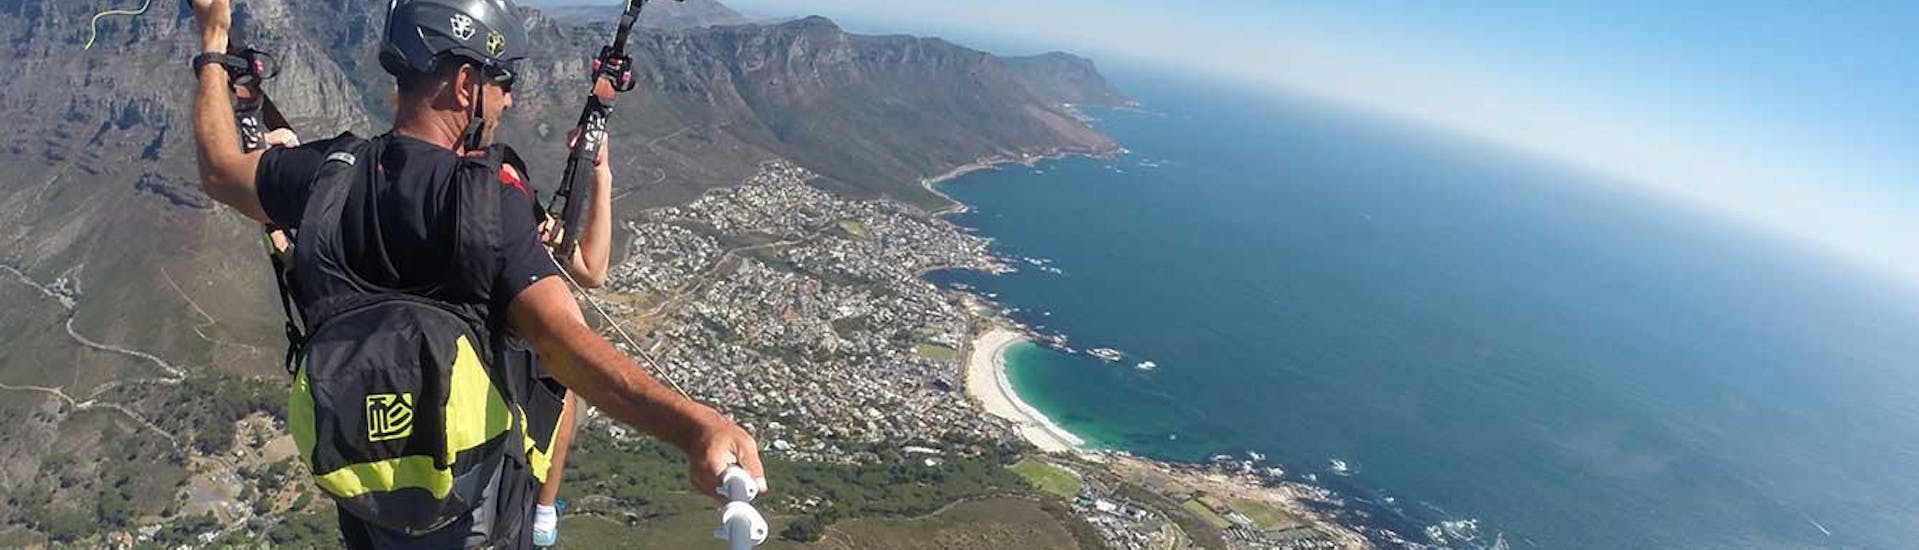 tandem-paragliding-in-cape-town-skywings-paragliding-hero